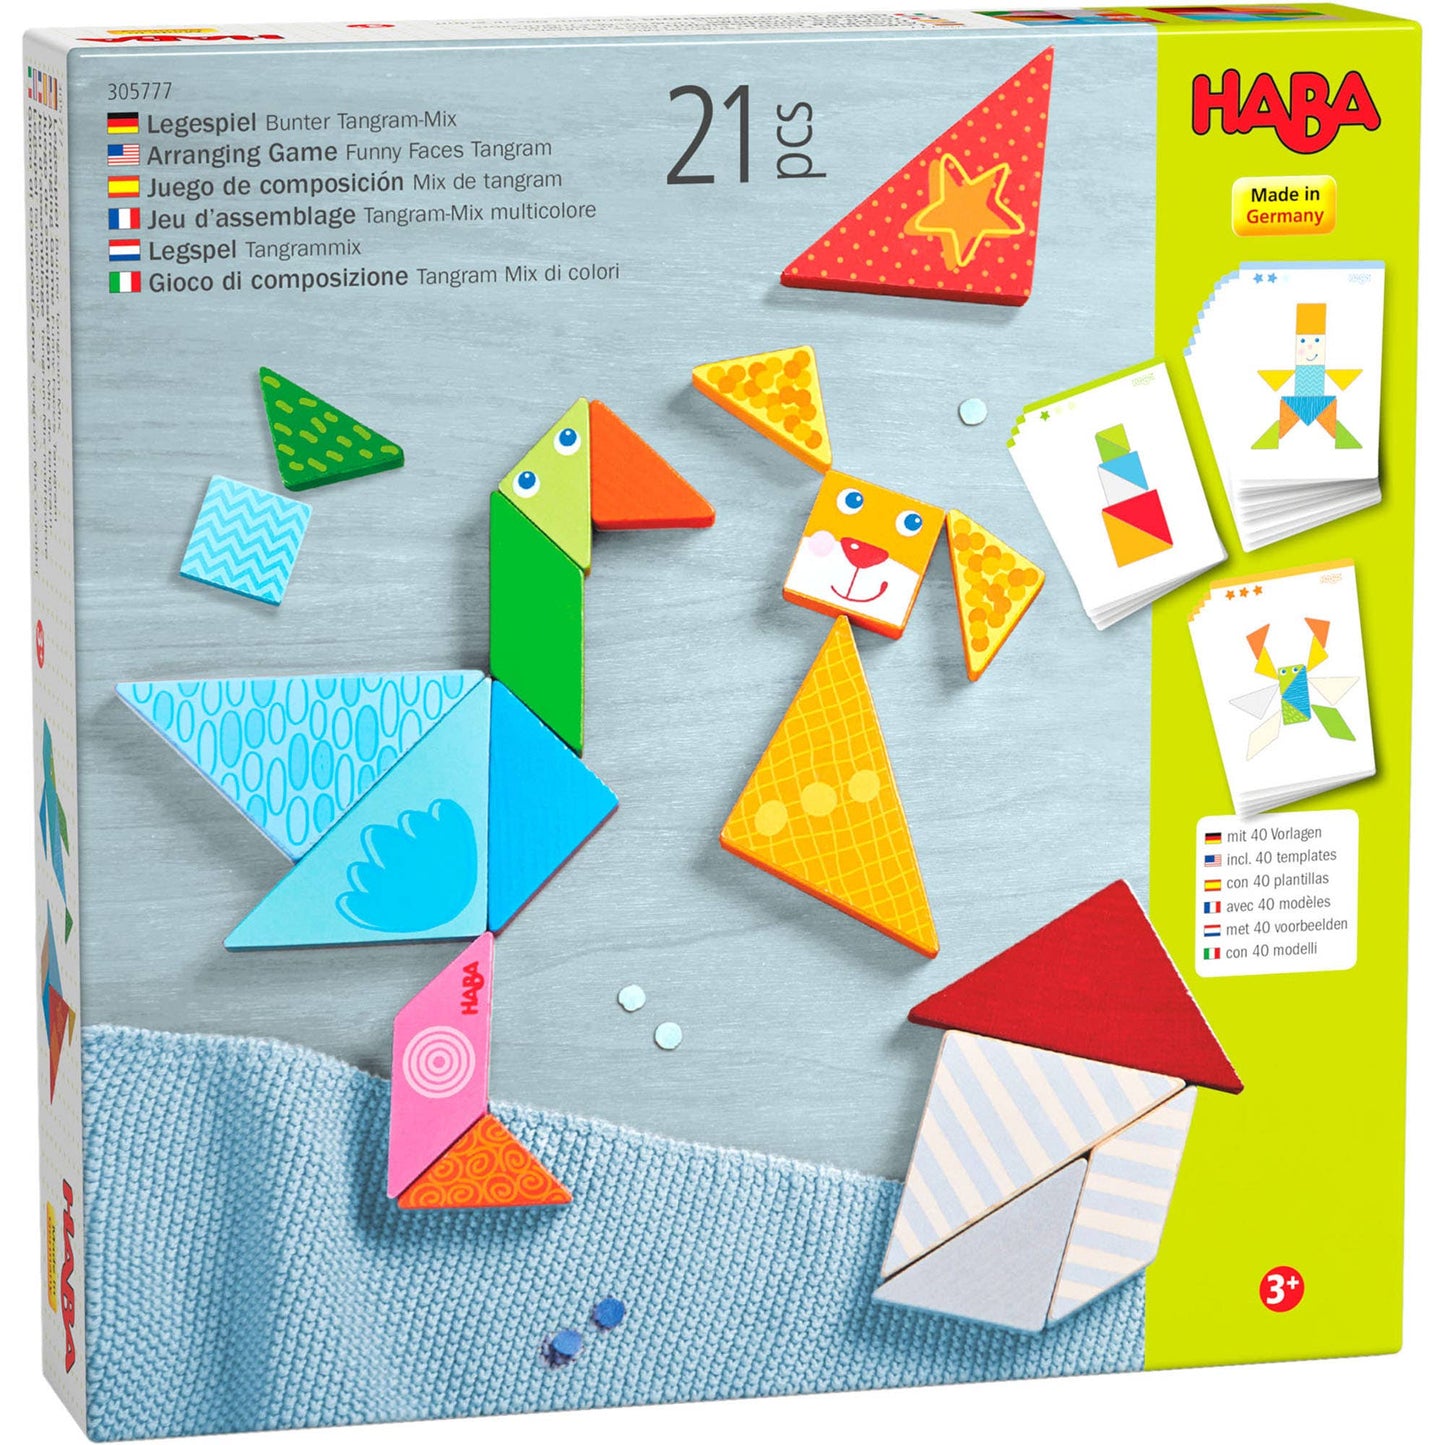 HABA - Arranging Game Funny Faces Tangram